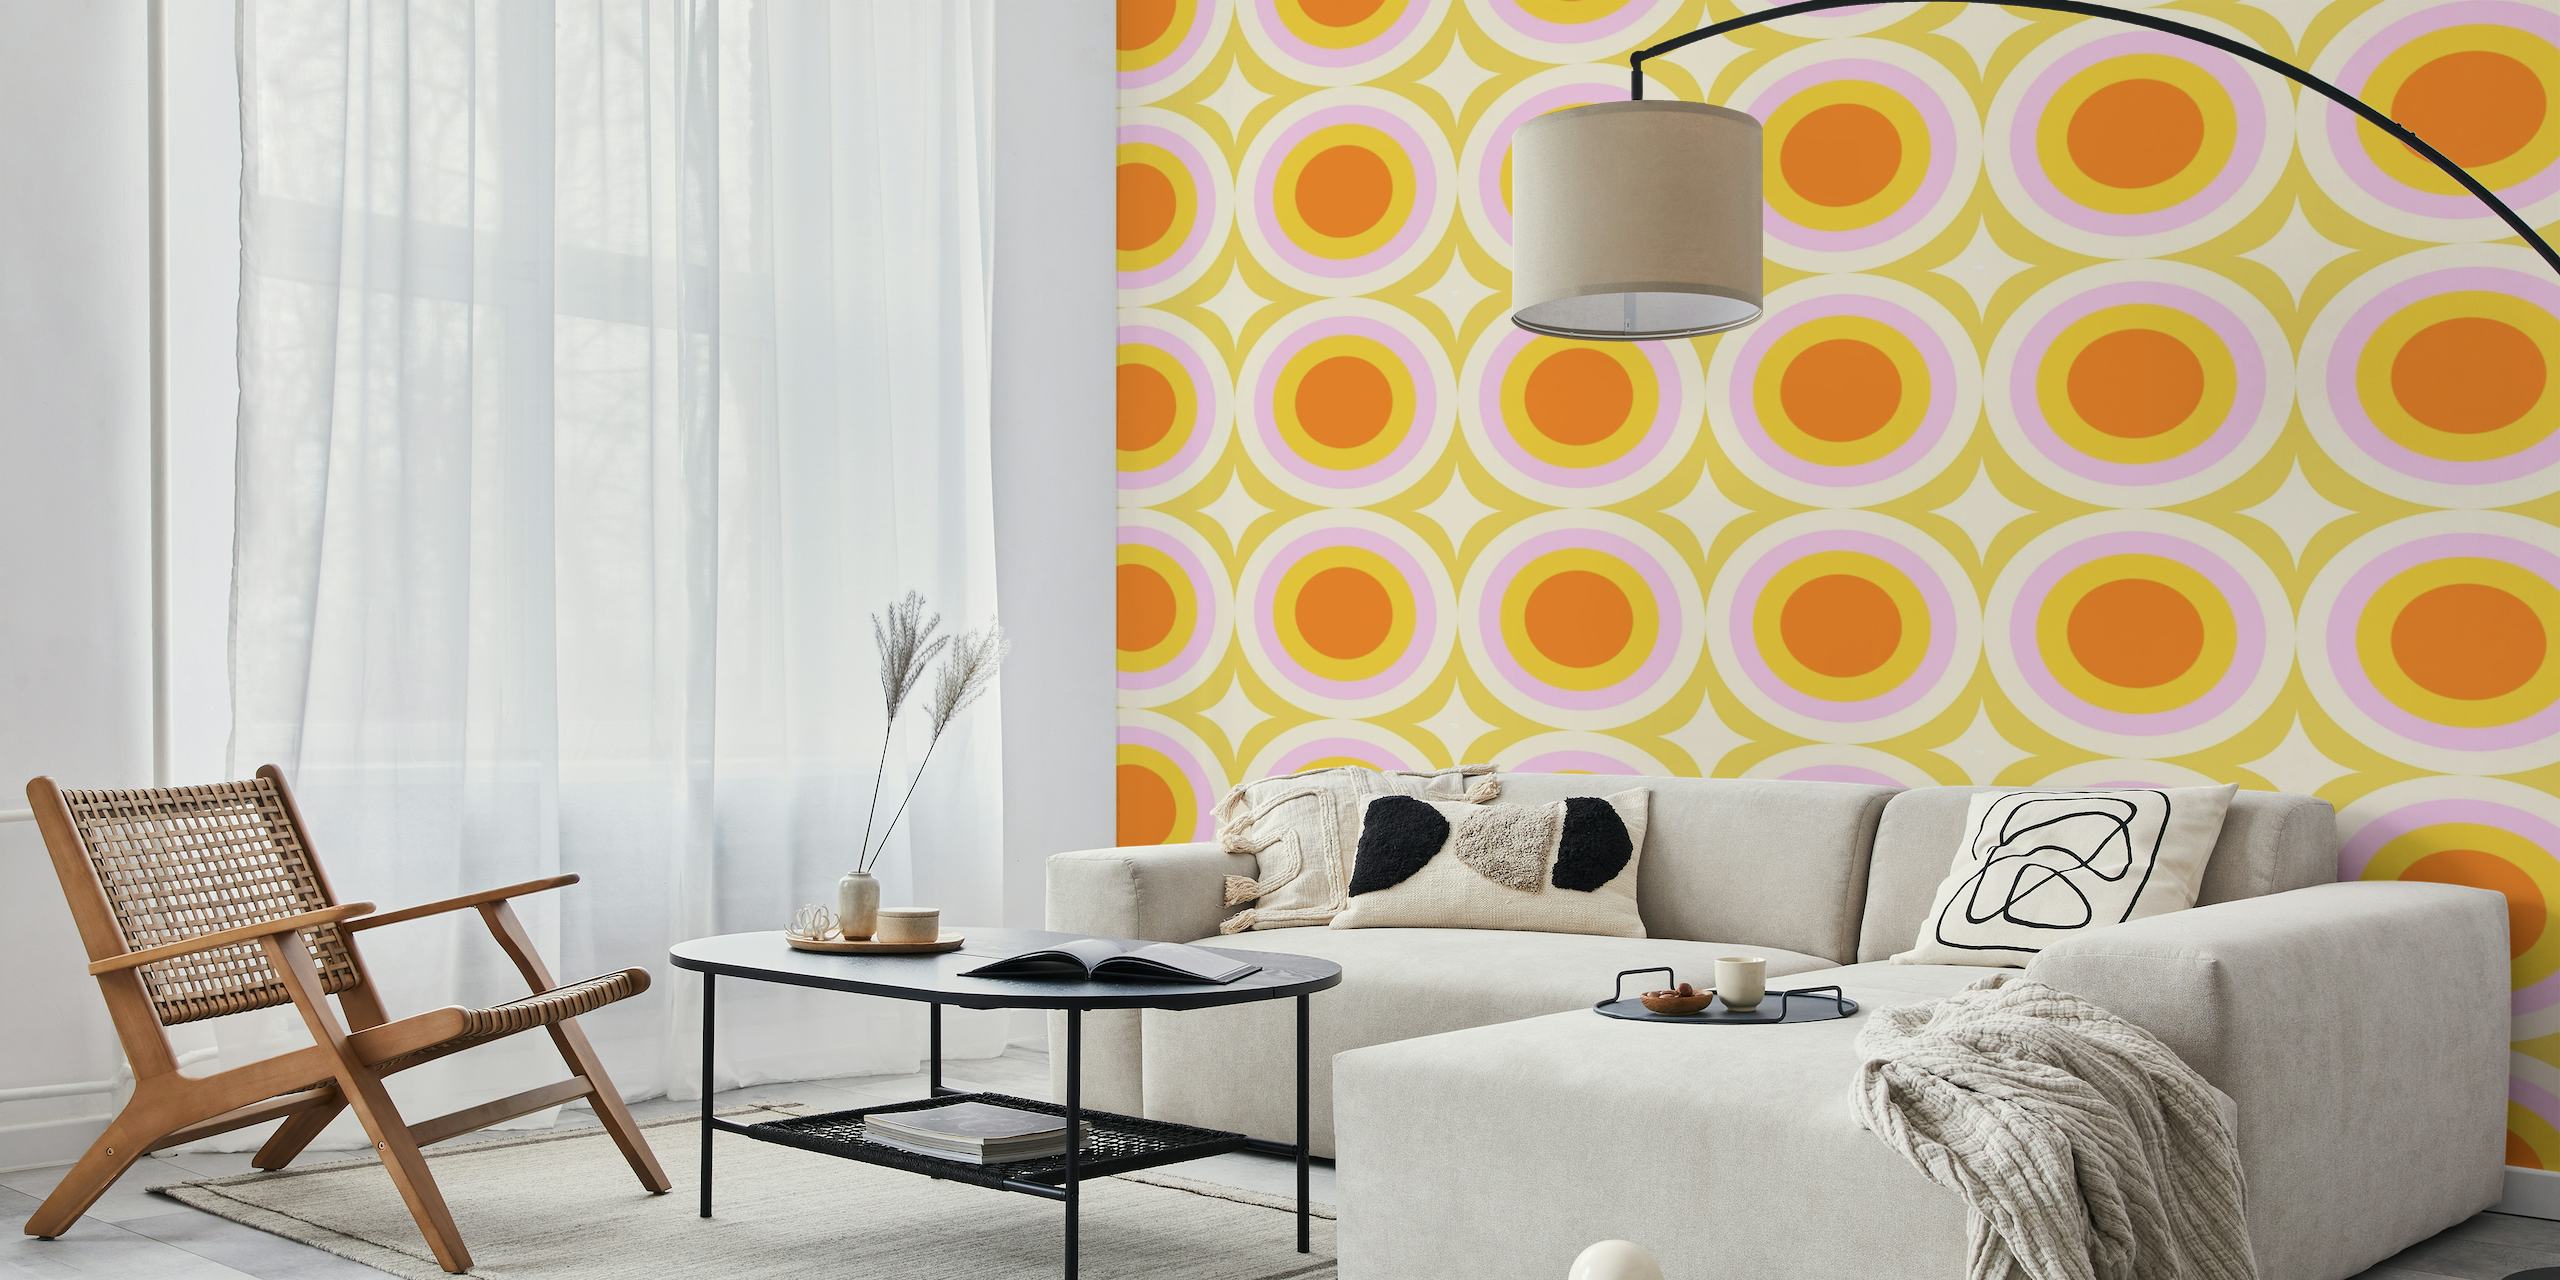 Groovy Dots Sage wall mural featuring orange and white circular patterns on a pale green background